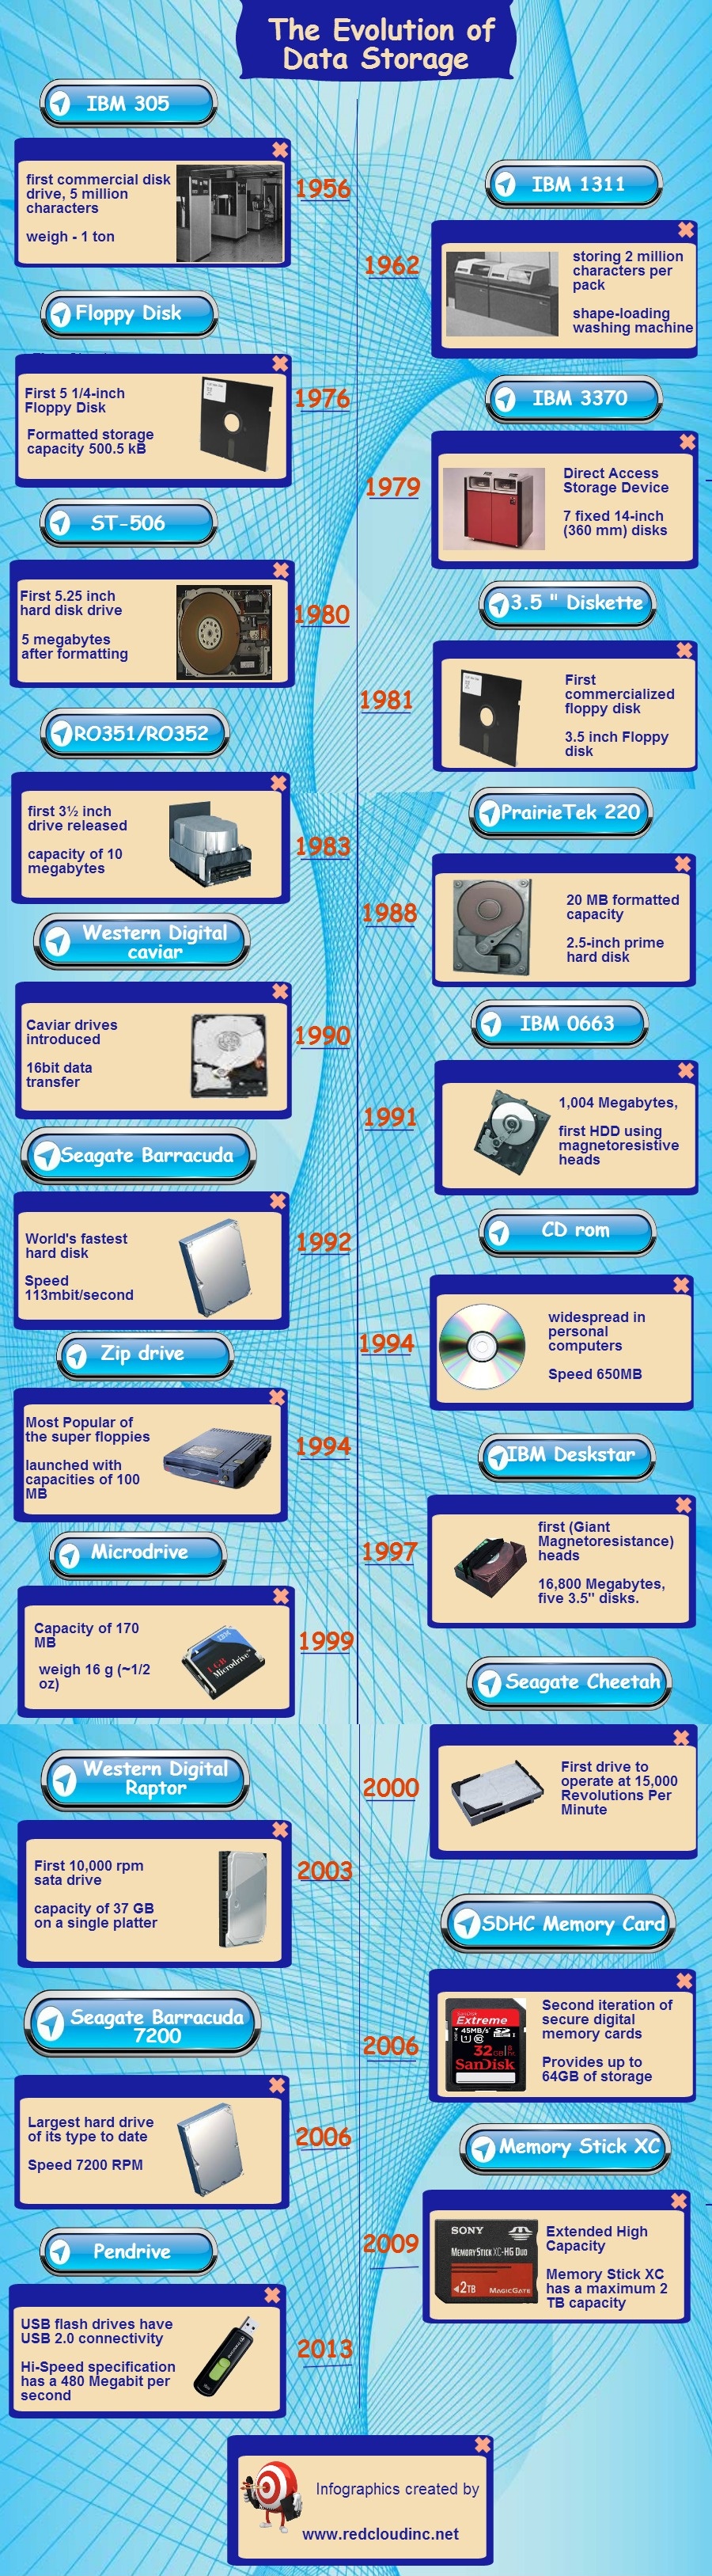 The Evolution of Data Storage | Visual.ly